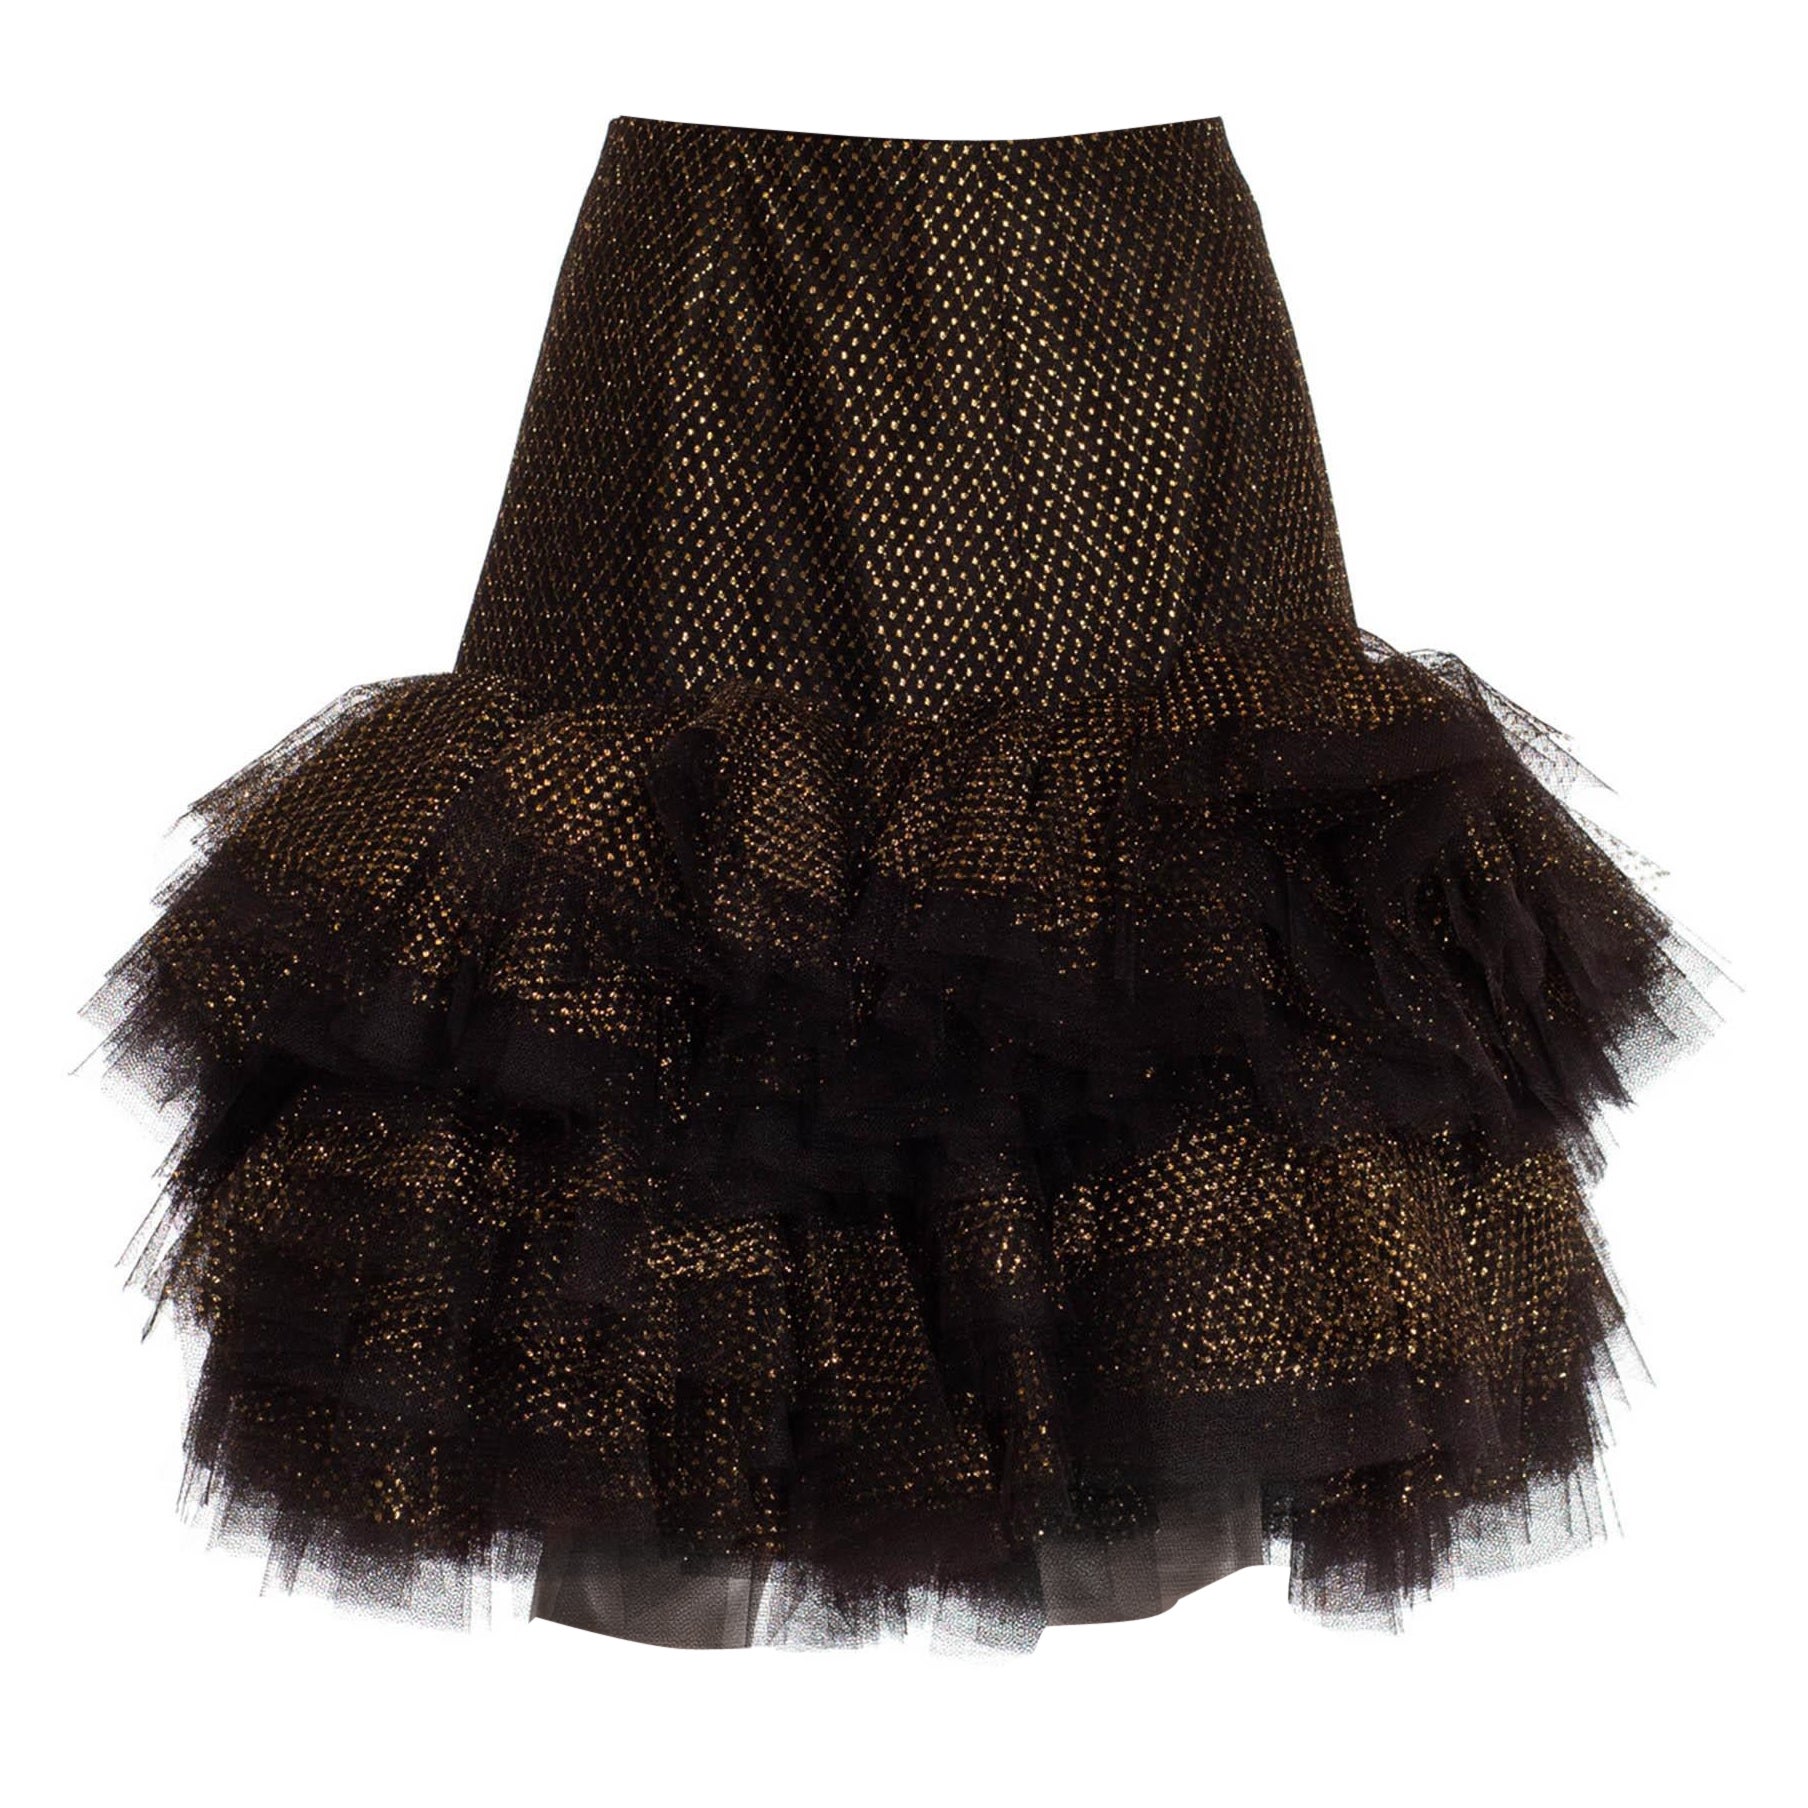 1980S Jacqueline De Ribes Black & Gold Tulle Tiered Polka Dot Skirt For Sale